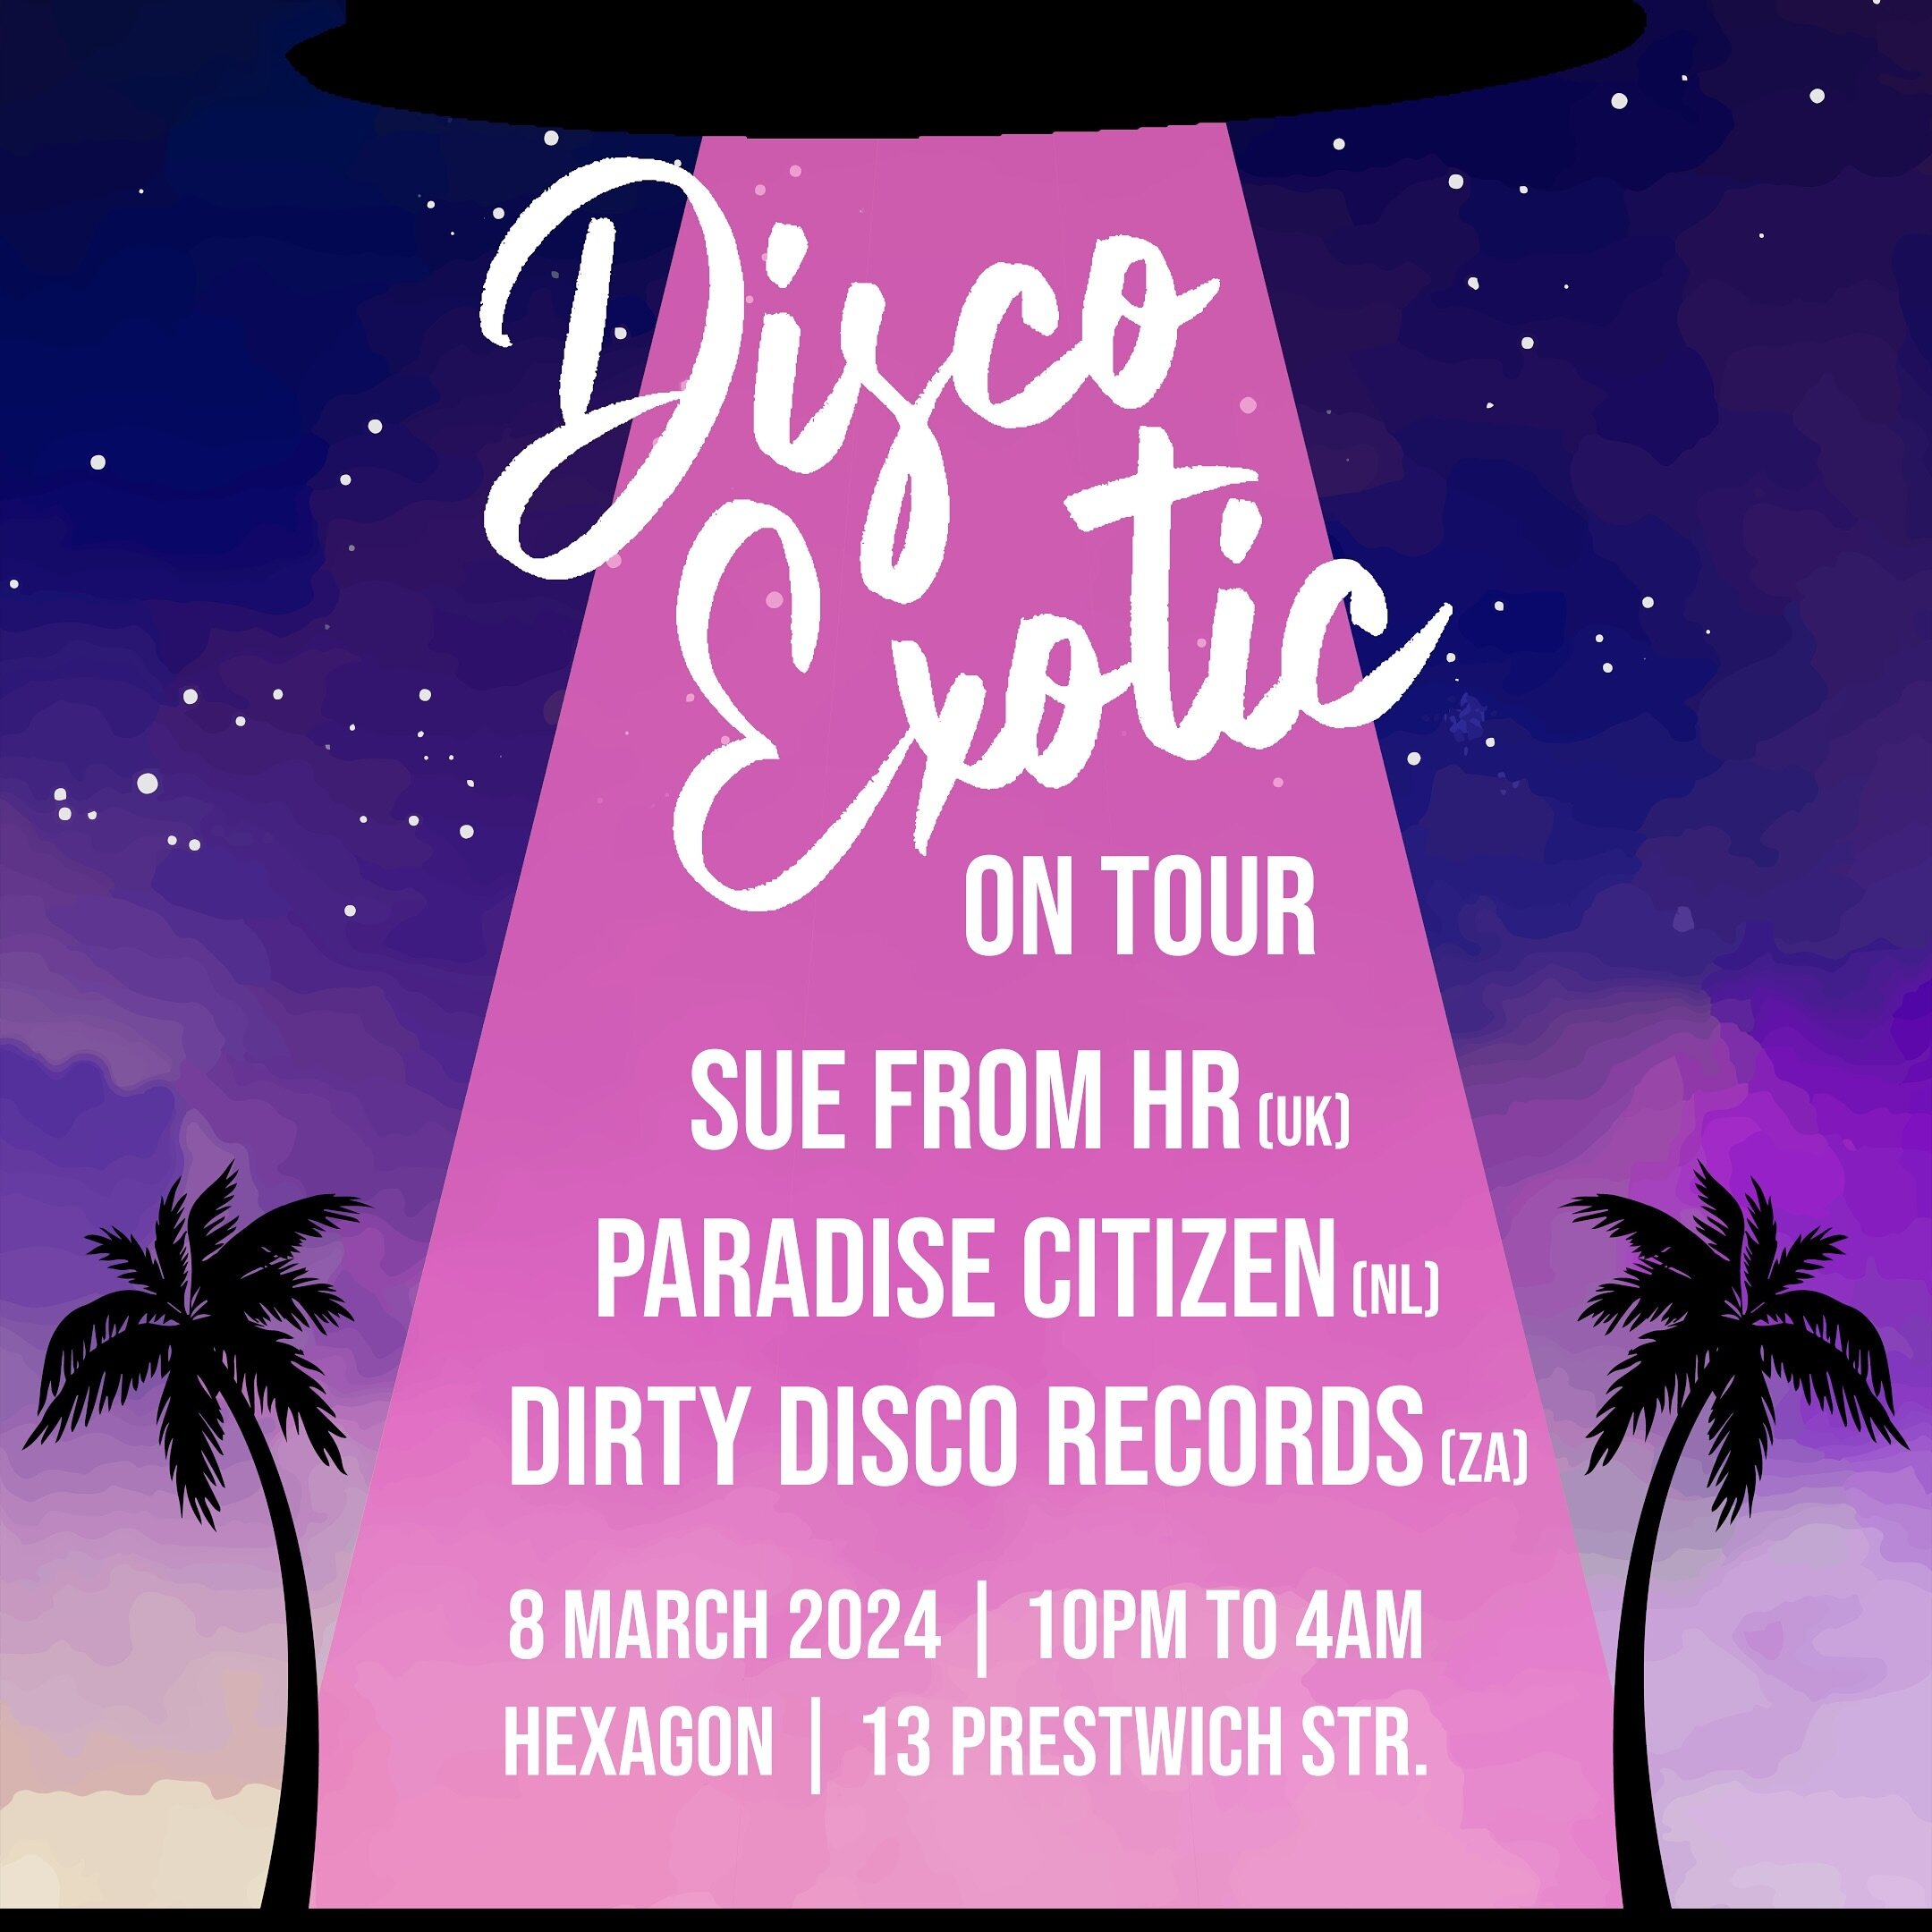 Well hello there! Here&rsquo;s some exciting news, @discoexotic is in town and together with @paradise.citizen we&rsquo;re all putting on a party! We&rsquo;re even giving away free tickets, all you have to do is fill out our free ticket form! 

Havin